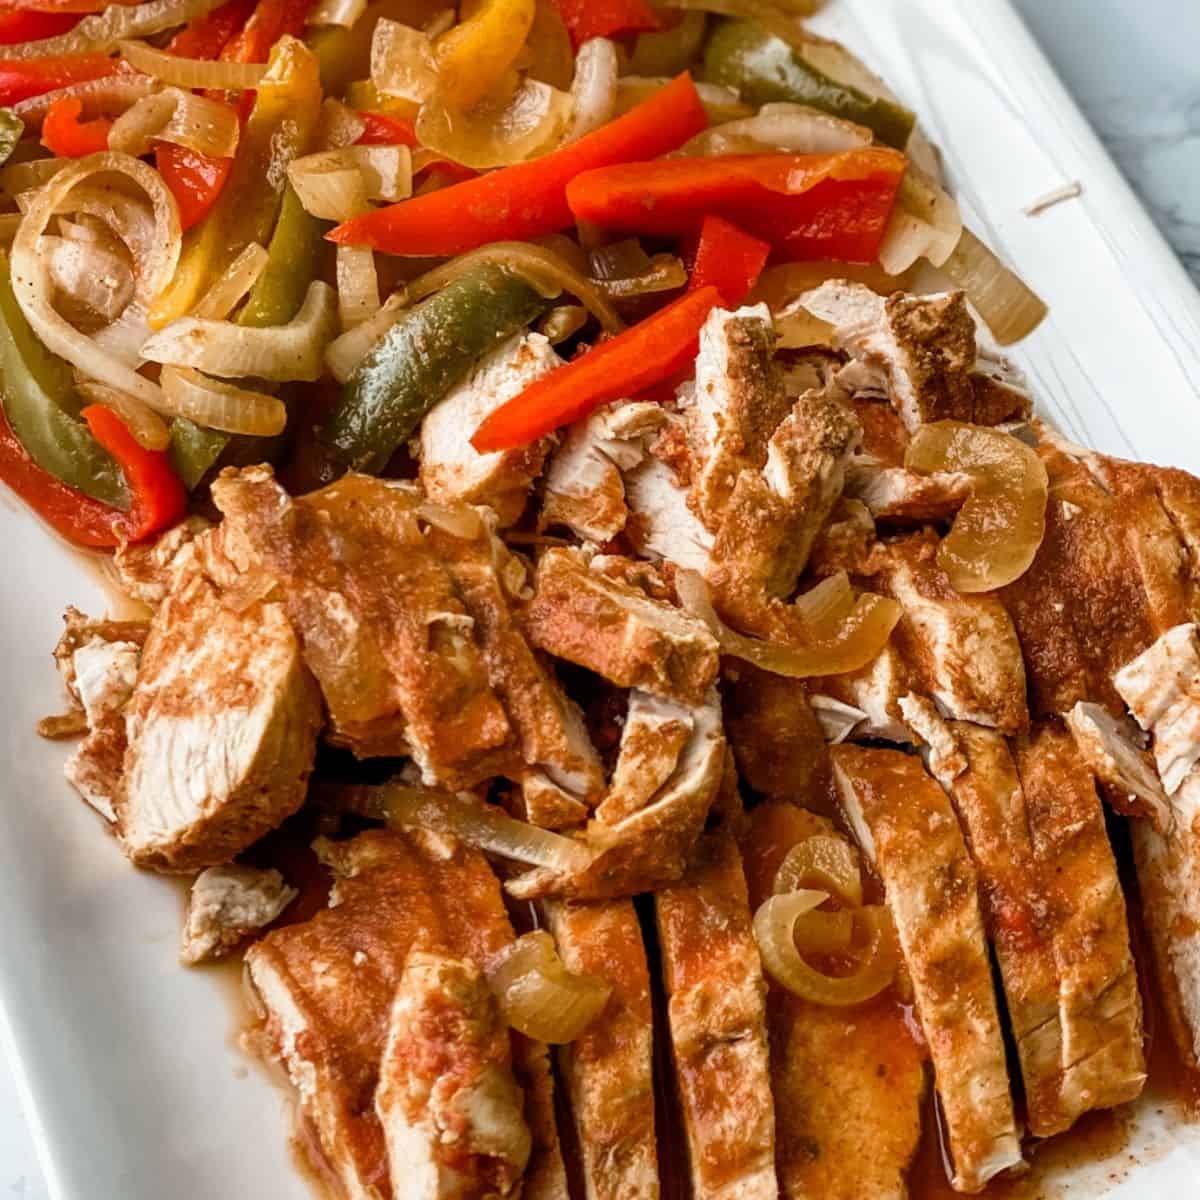 strips of chicken fajitas on a plate next to the onions and peppers.